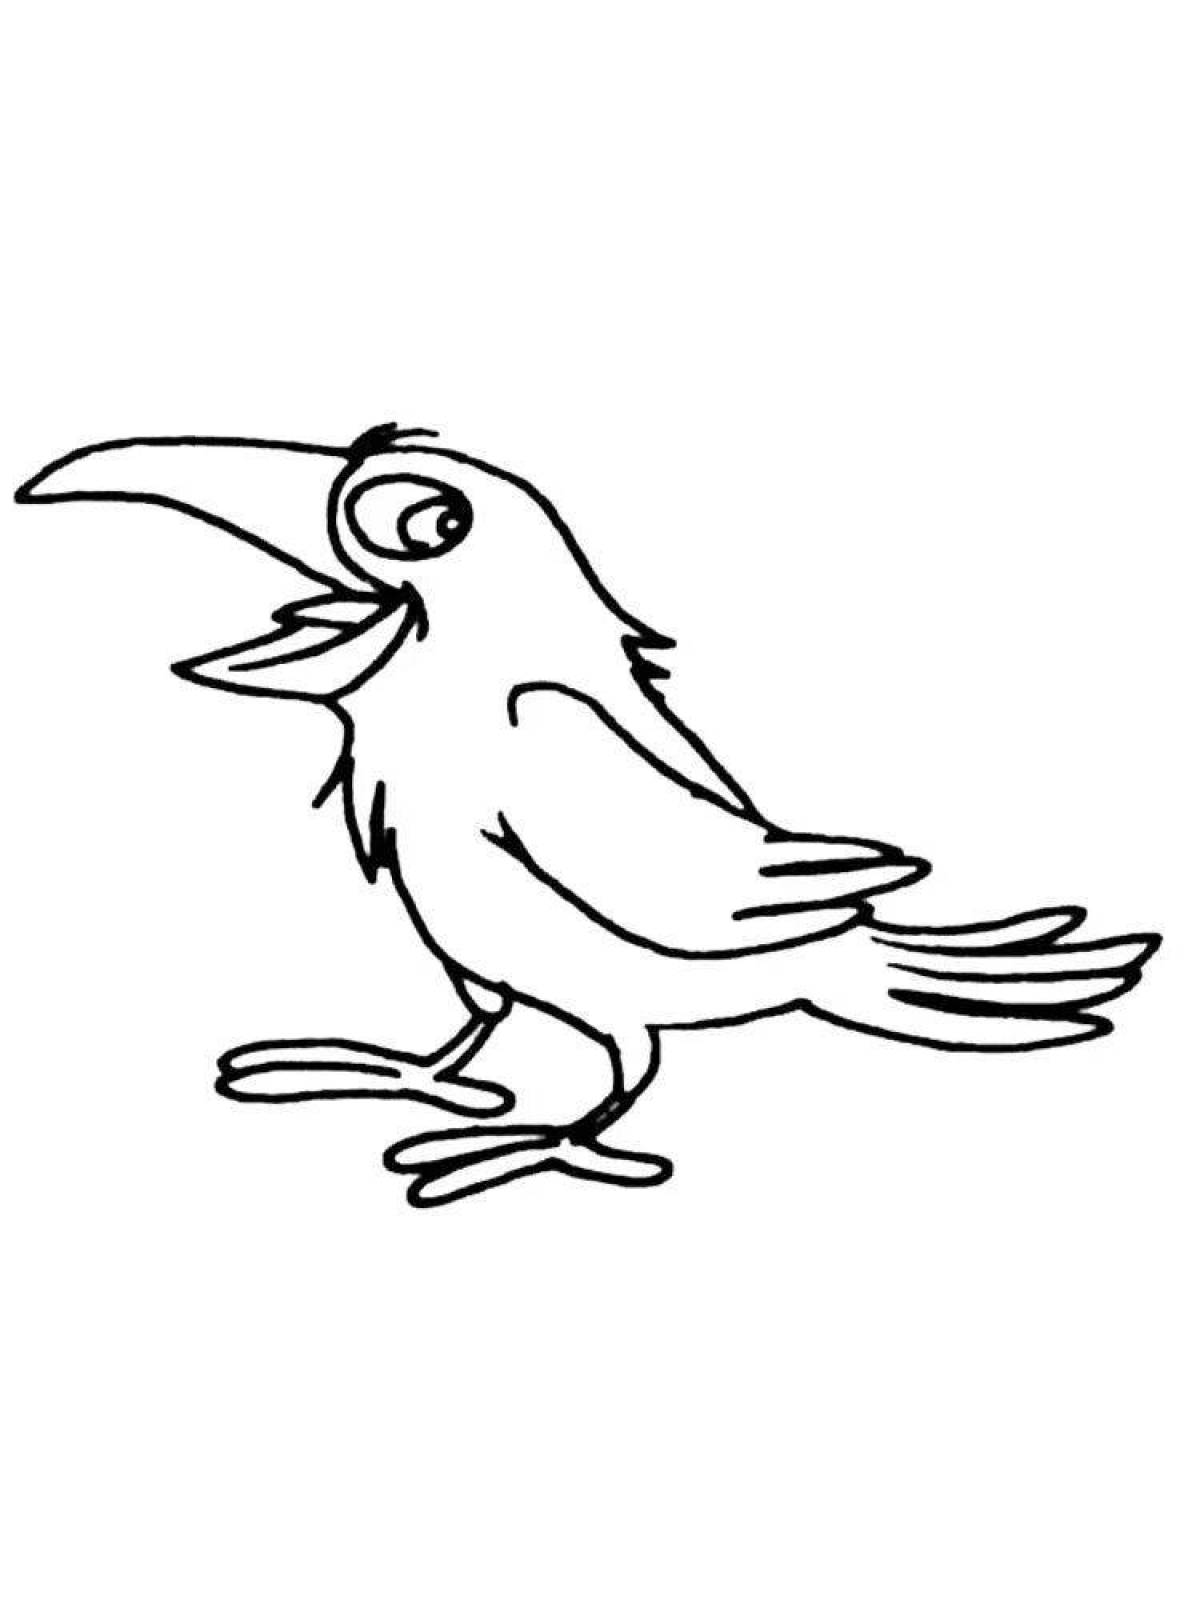 Crow picture for kids #1